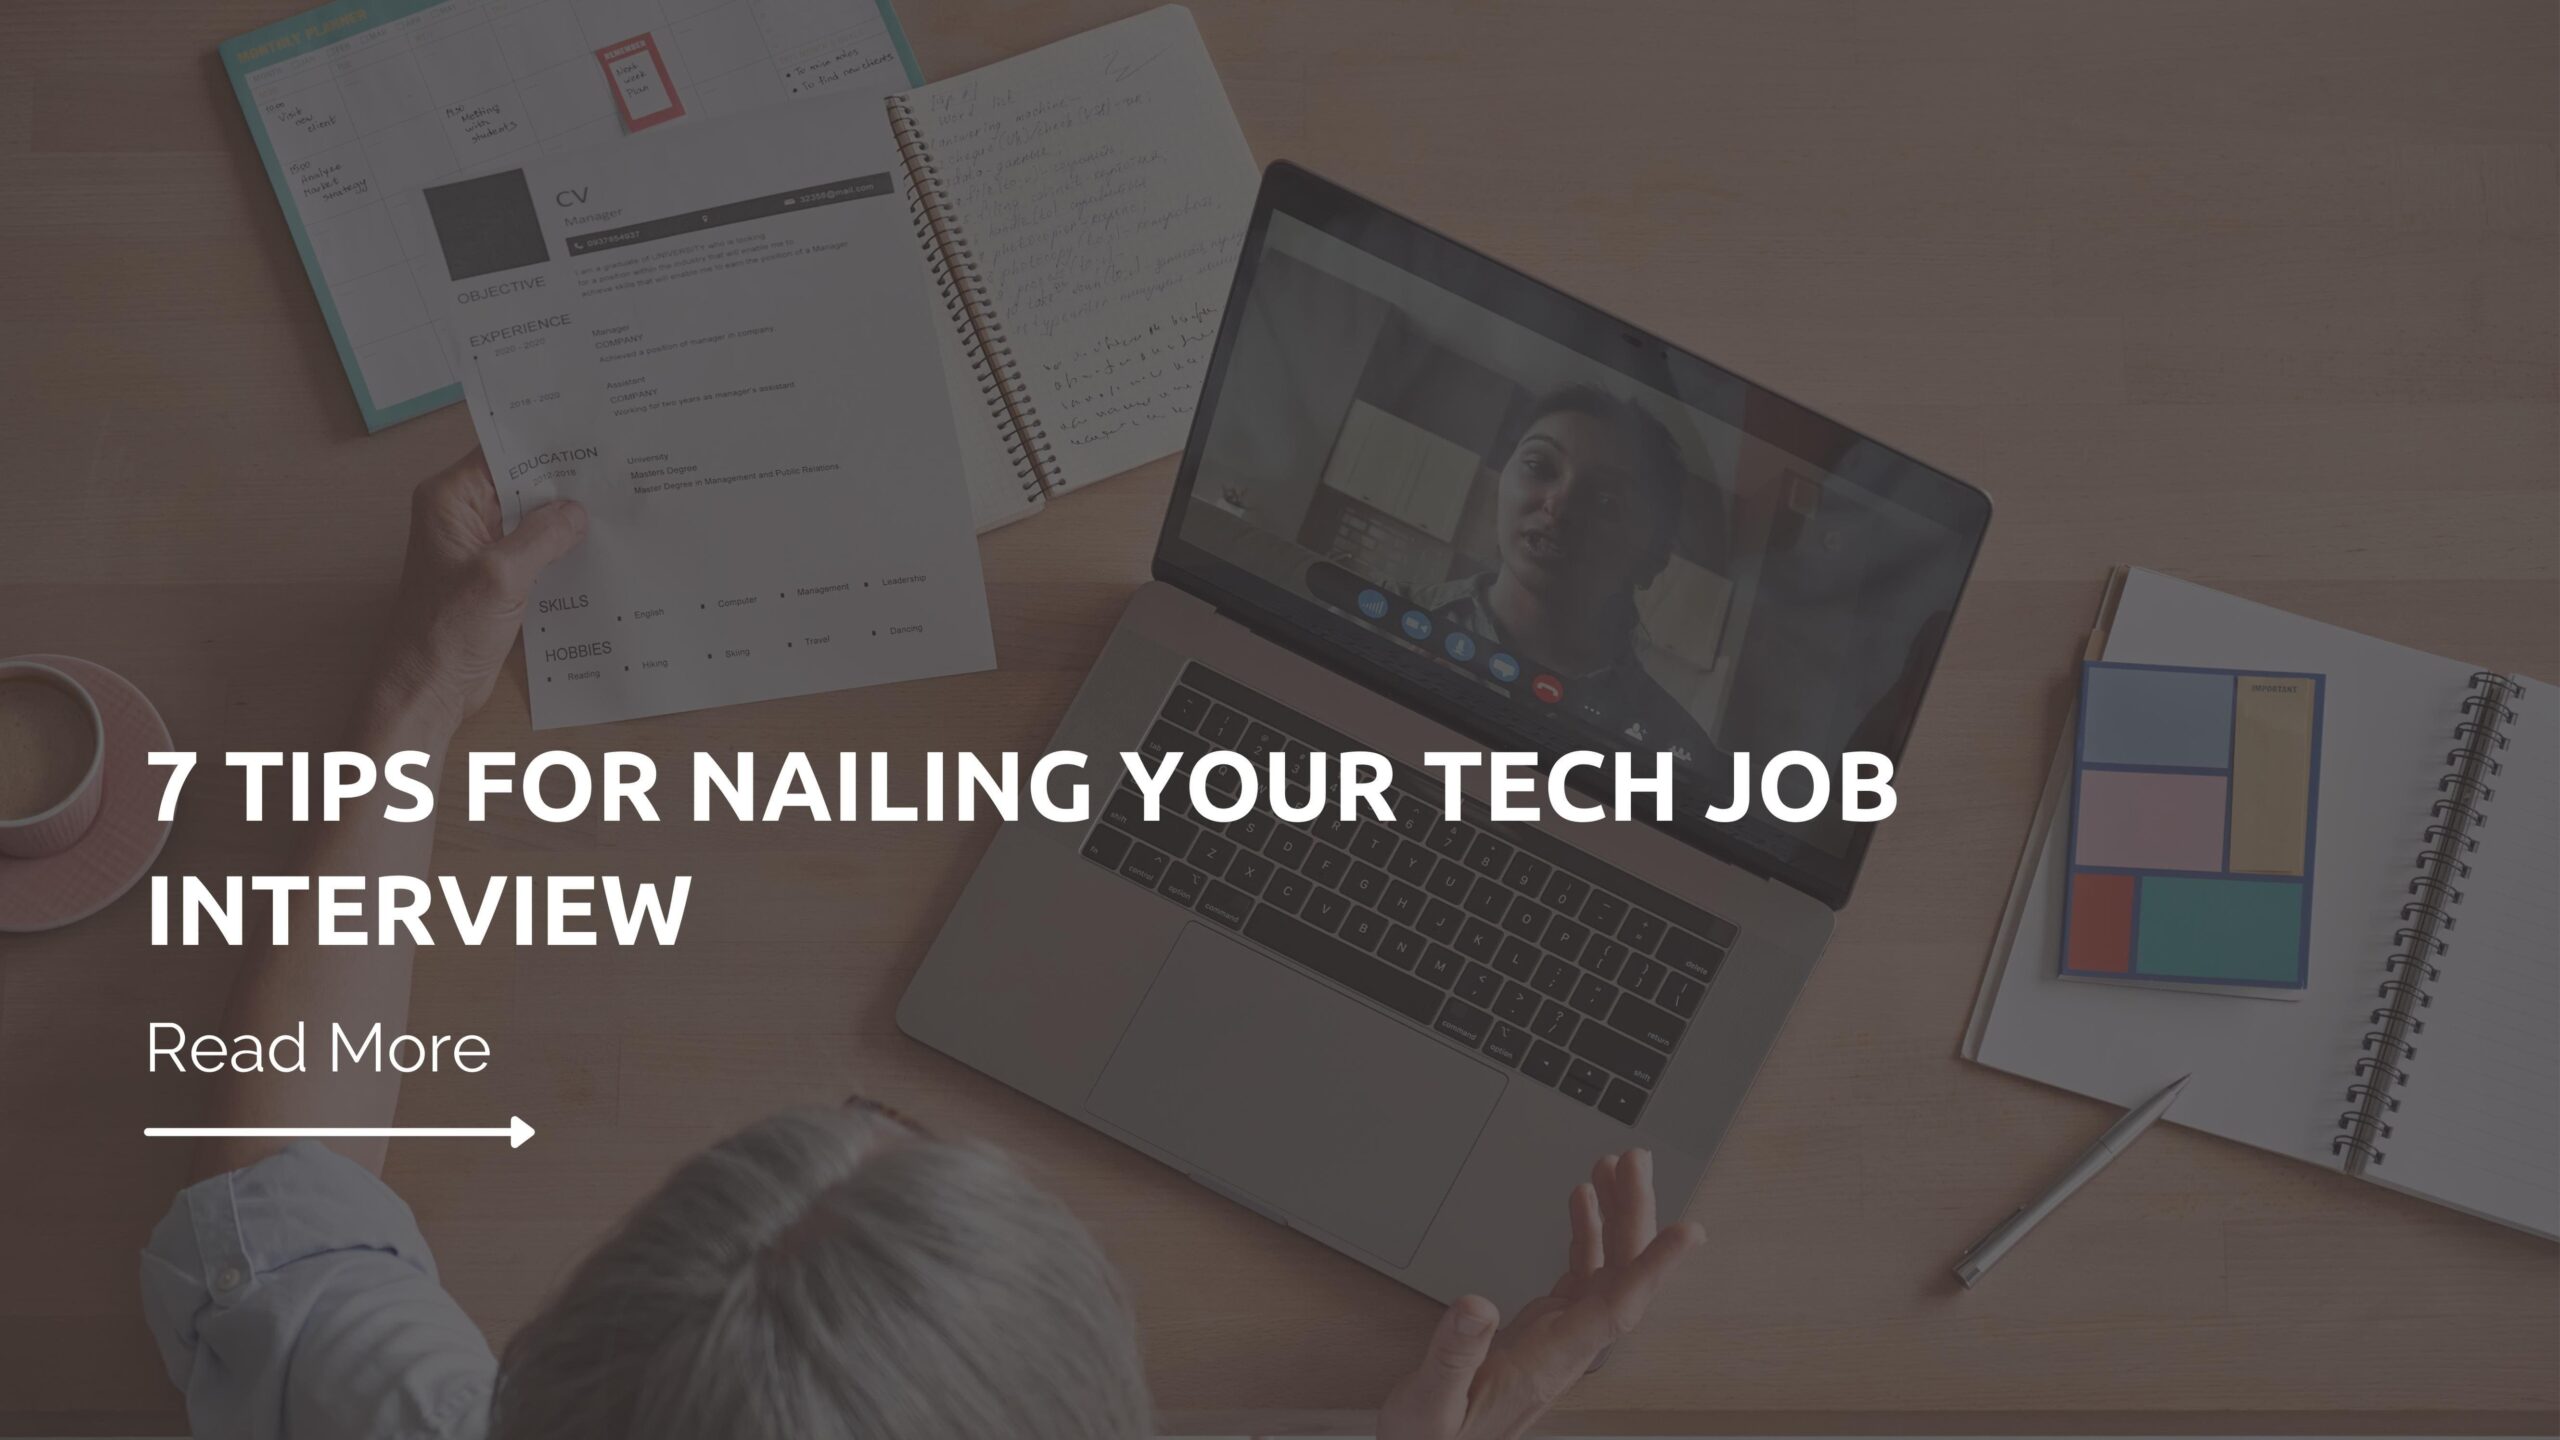 7 Tips for Nailing Your Tech Job Interview